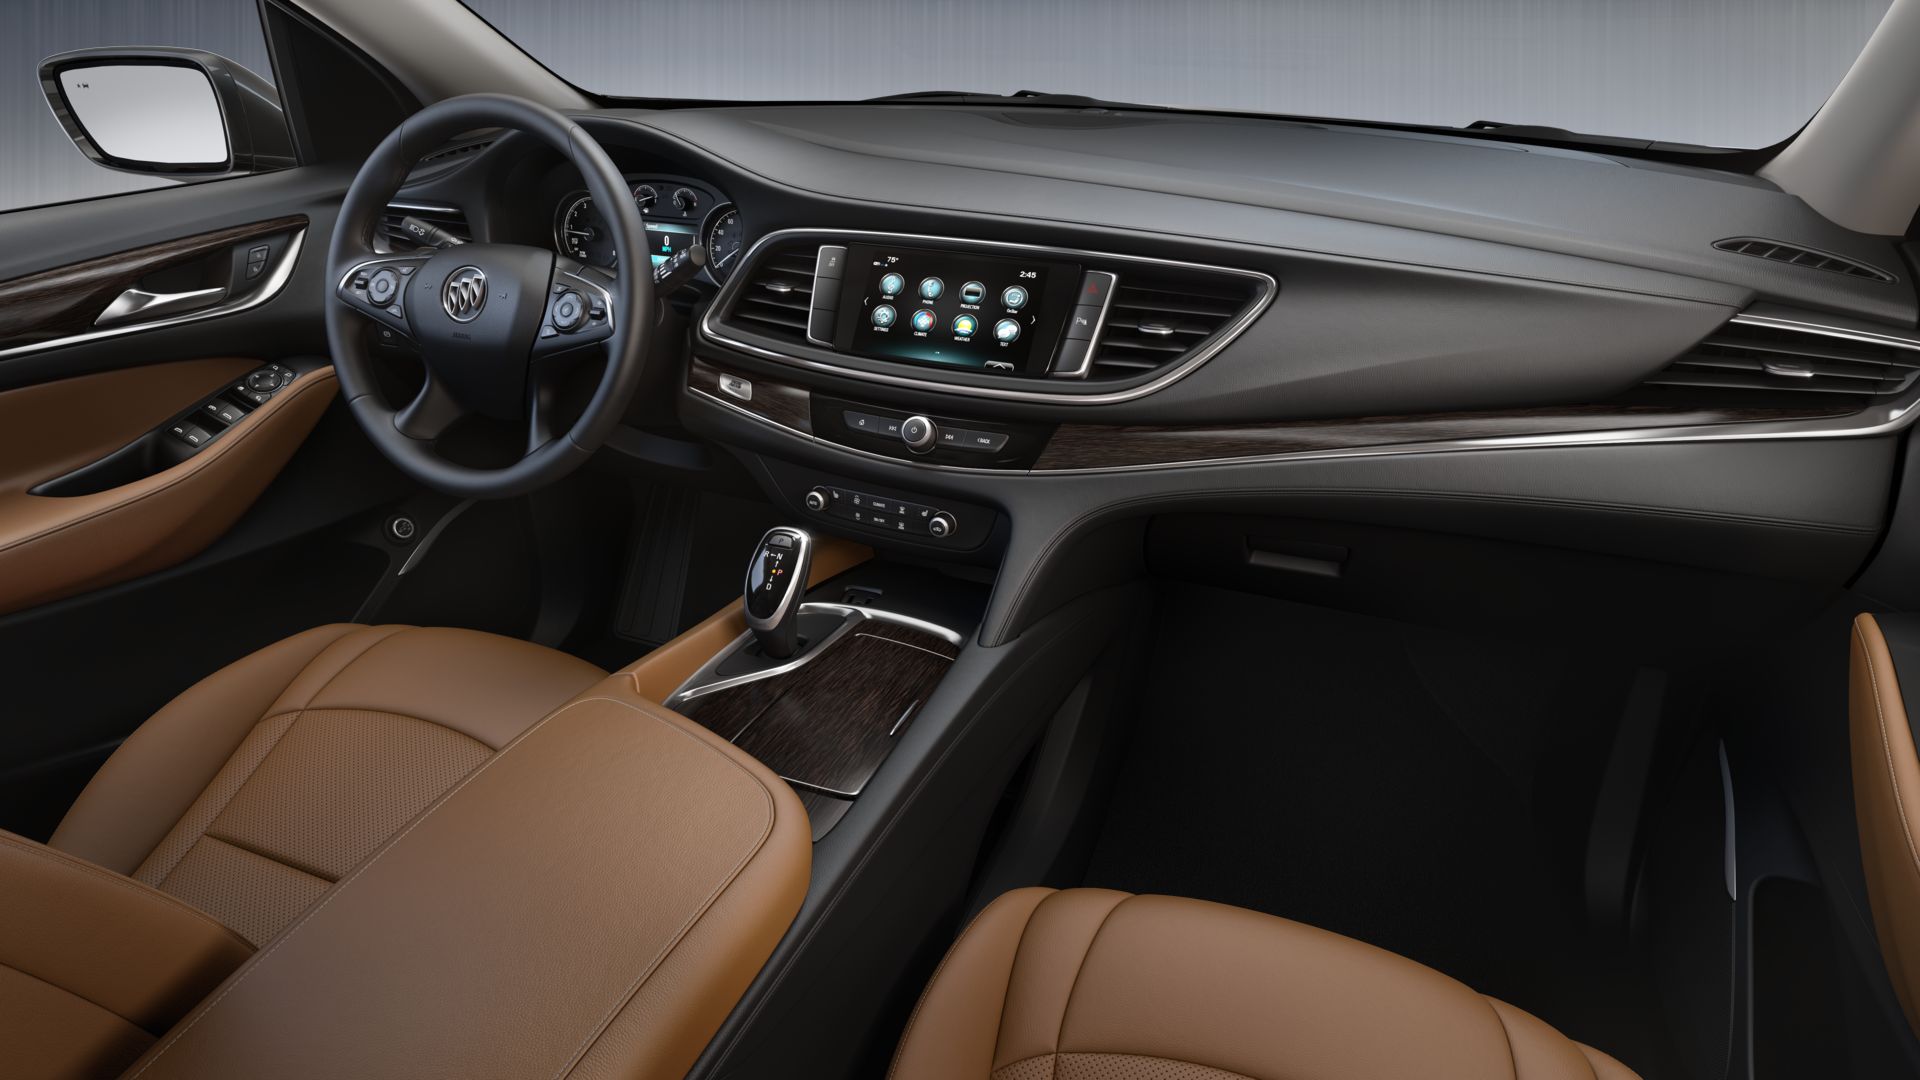 2020 Buick Enclave Interior Colors GM Authority